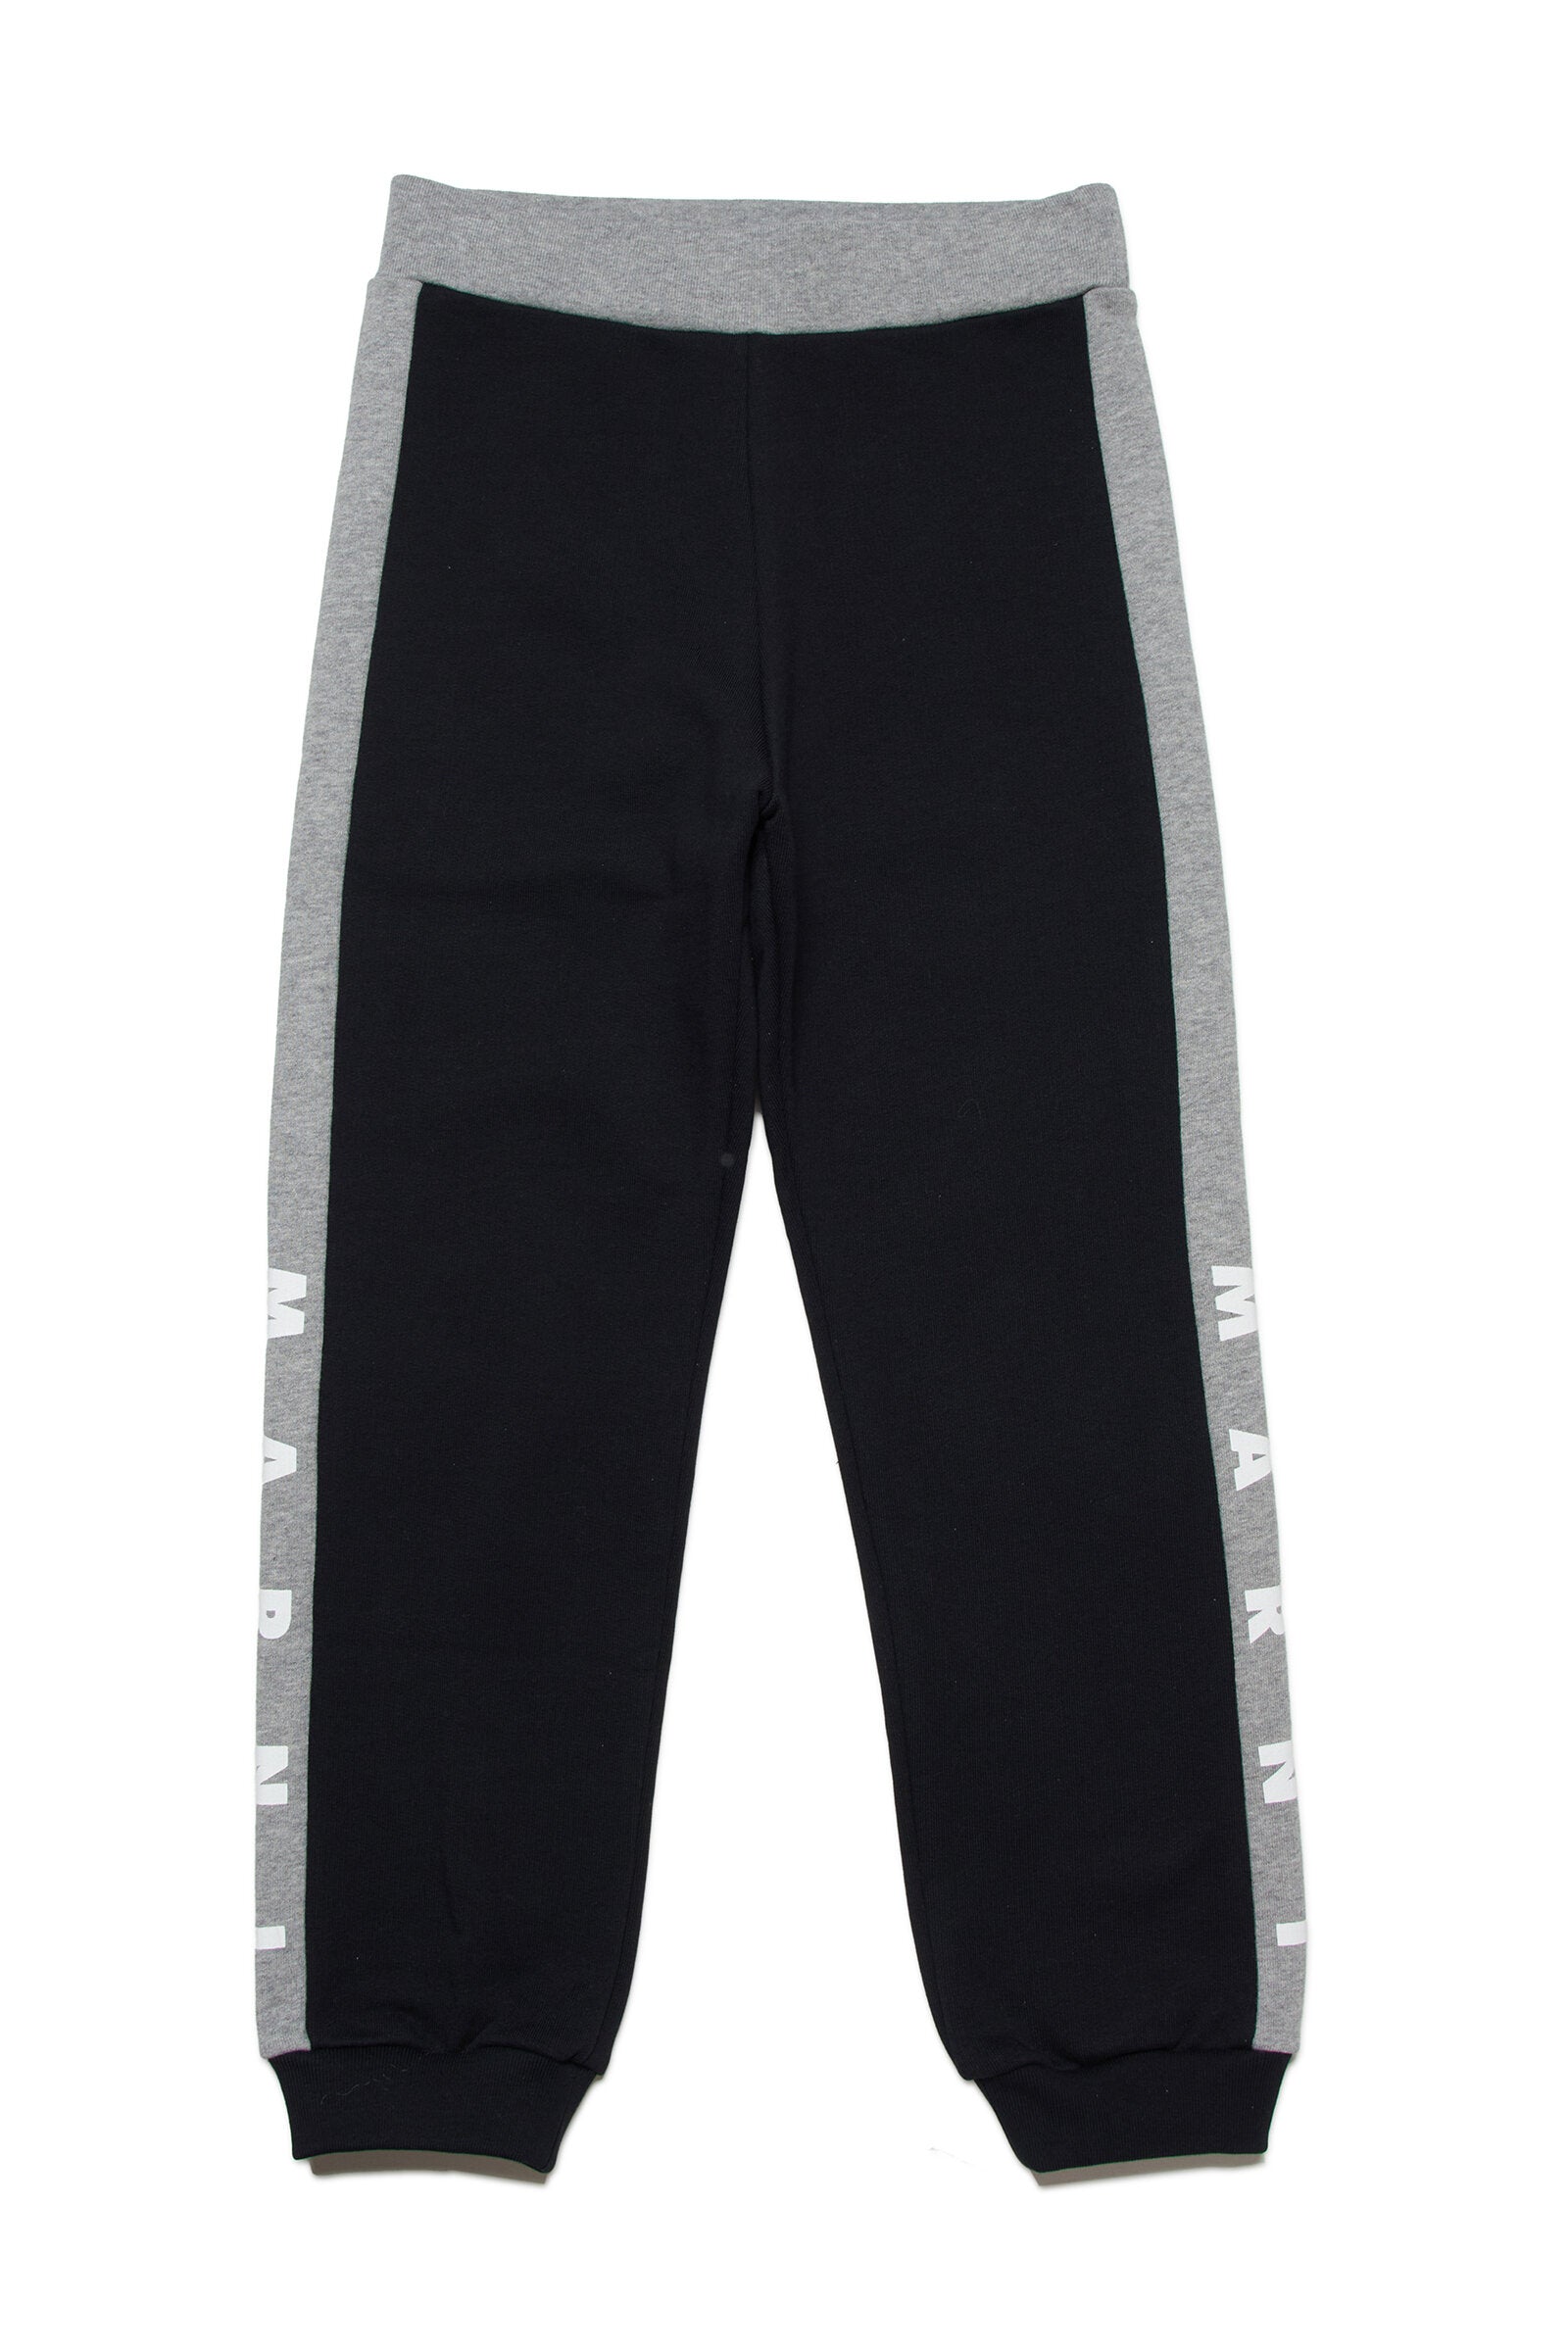 Colorblock in fleece jogger pants with logo bands